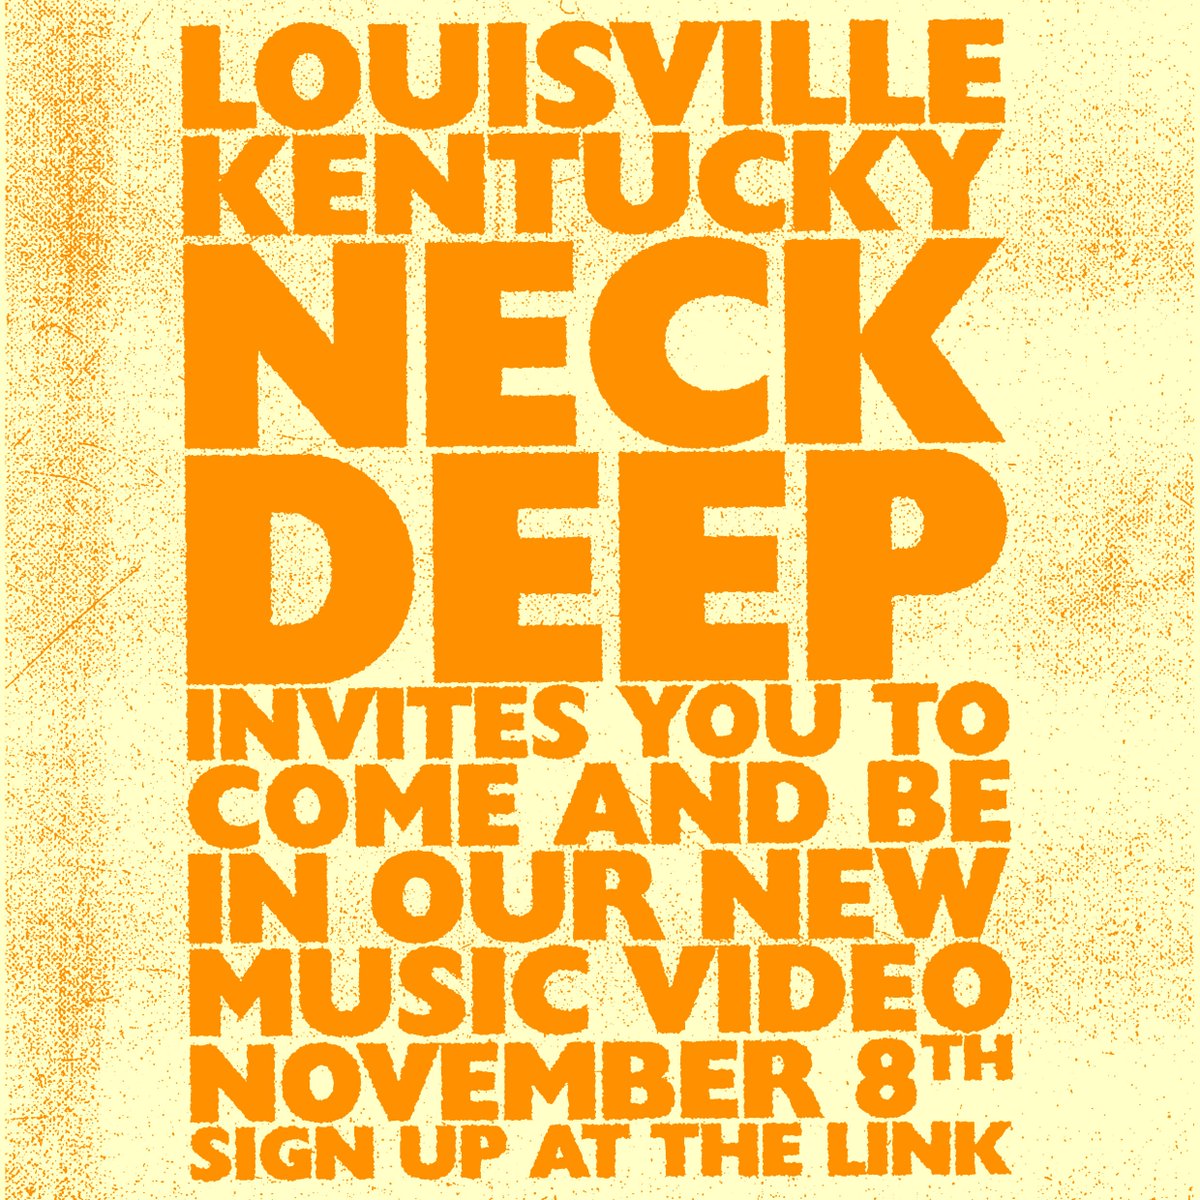 Neck Deep invites you to be apart of our brand new music video. Filming in Louisville, KY on Nov 8. More info and sign up here bit.ly/NeckDeepInvite… 🎬🍿